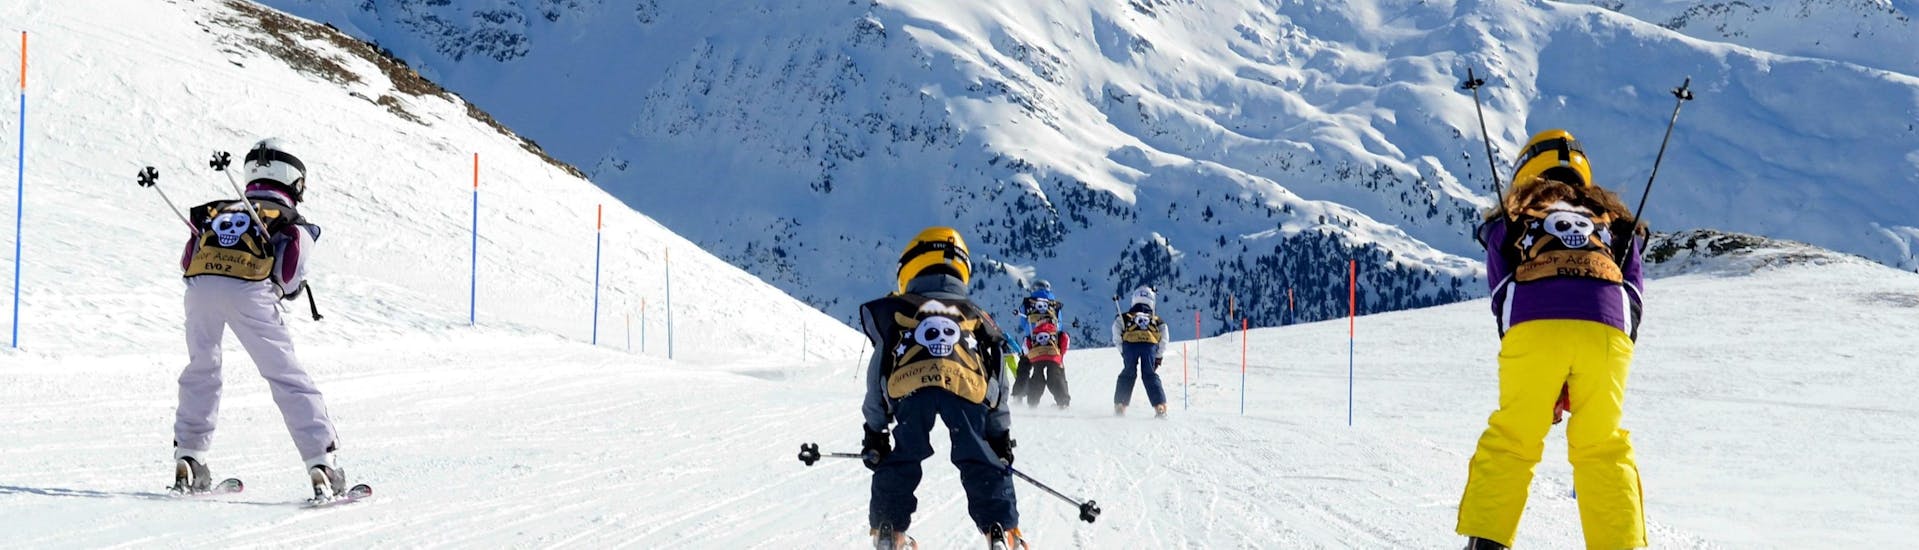 Kids are skiing down a slope during their Kids Ski Lessons (5-12 y.) for All Levels with Evolution 2 Peisey Vallandry.